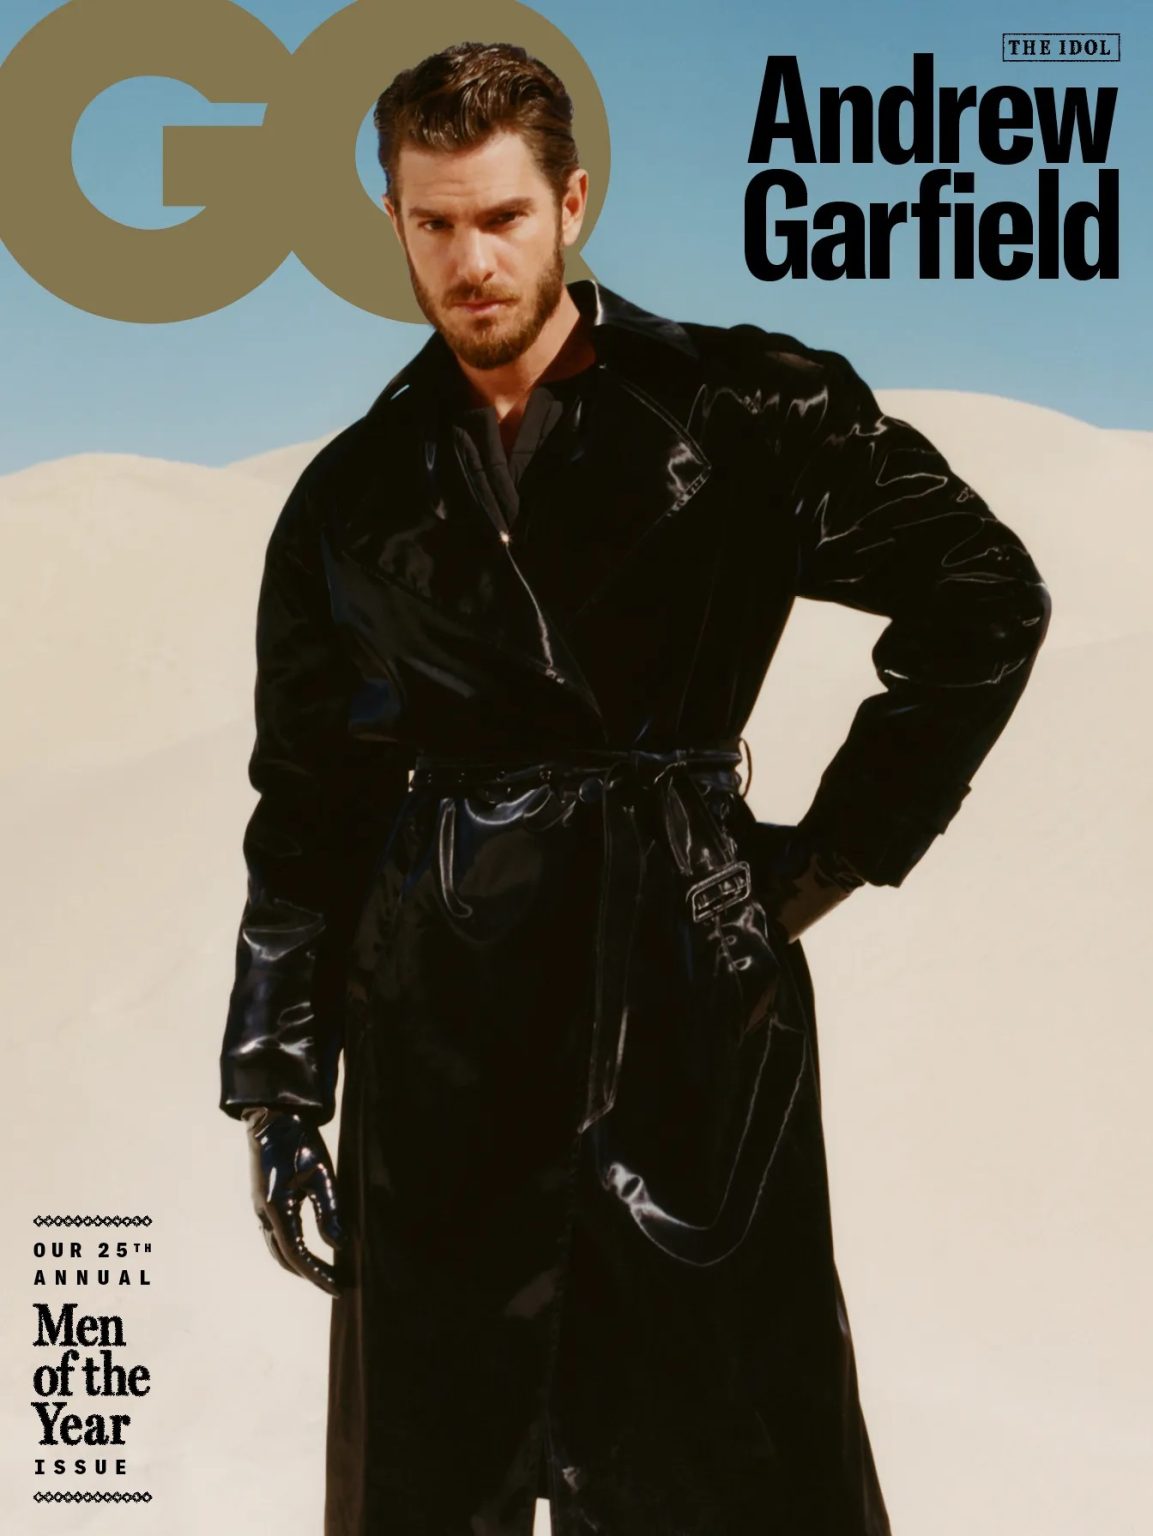 Andrew Garfield Wows On The Cover Of British GQ BeautifulBallad